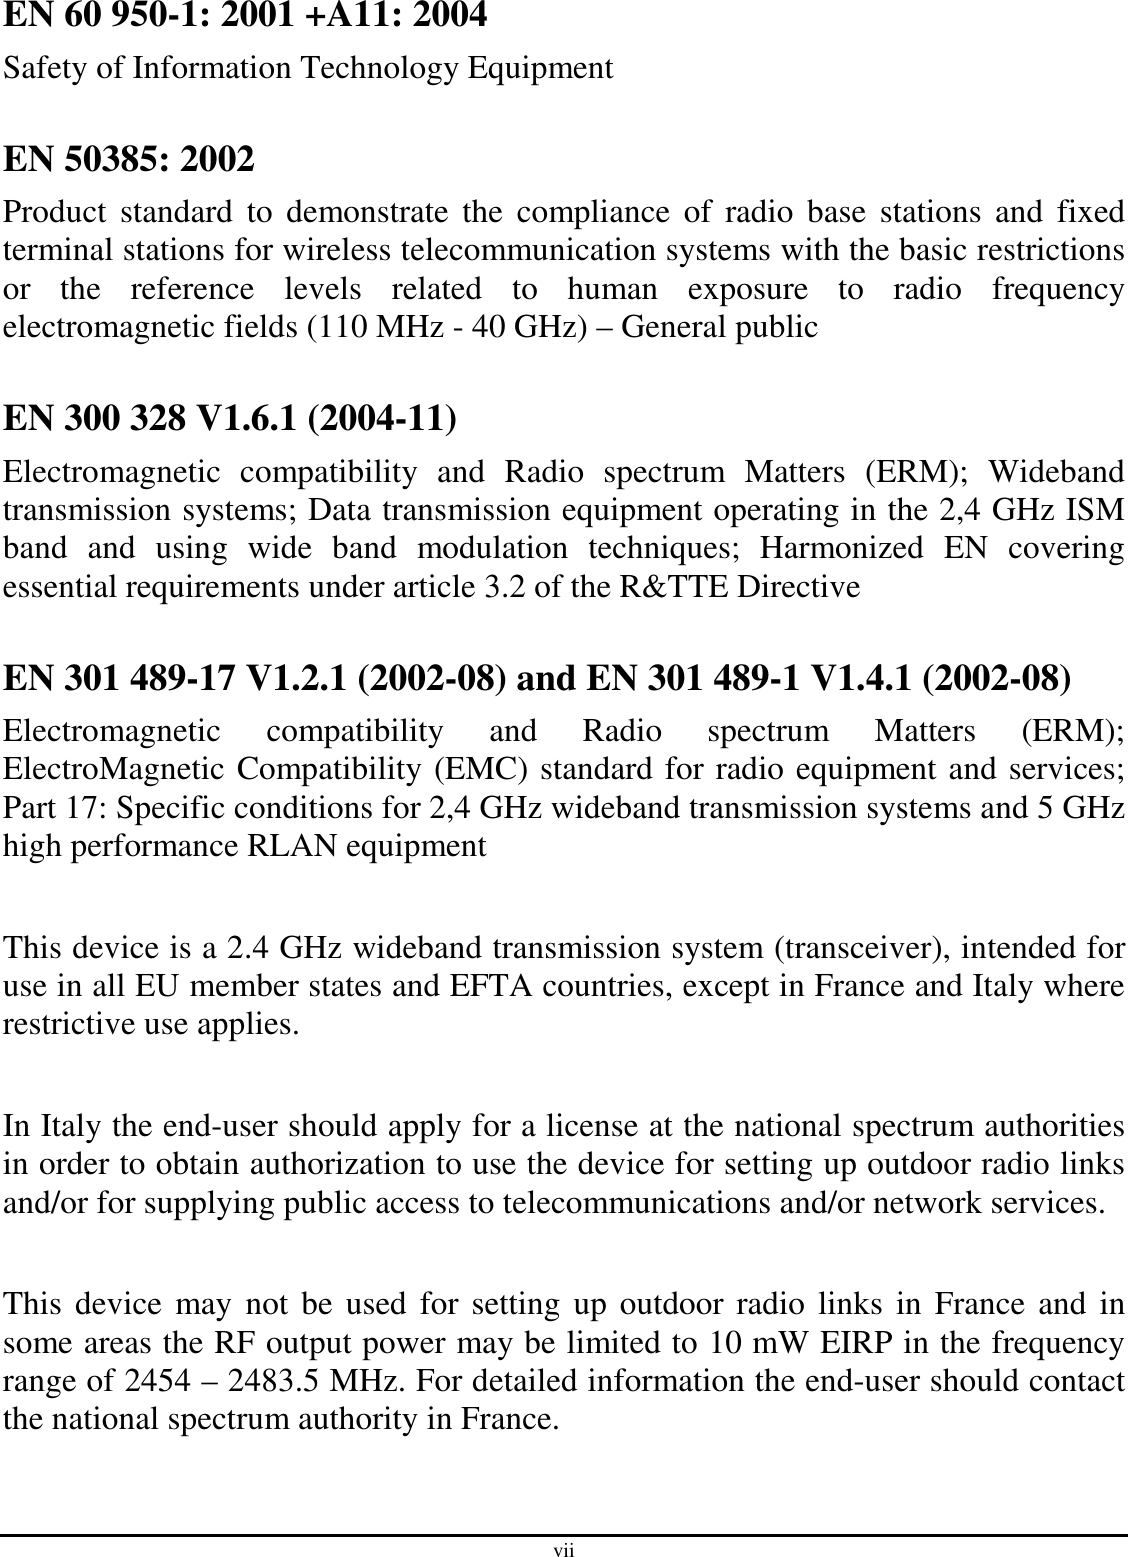 vii EN 60 950-1: 2001 +A11: 2004 Safety of Information Technology Equipment  EN 50385: 2002 Product  standard  to  demonstrate  the  compliance  of  radio  base  stations and  fixed terminal stations for wireless telecommunication systems with the basic restrictions or  the  reference  levels  related  to  human  exposure  to  radio  frequency electromagnetic fields (110 MHz - 40 GHz) – General public  EN 300 328 V1.6.1 (2004-11) Electromagnetic  compatibility  and  Radio  spectrum  Matters  (ERM);  Wideband transmission systems; Data transmission equipment operating in the 2,4 GHz ISM band  and  using  wide  band  modulation  techniques;  Harmonized  EN  covering essential requirements under article 3.2 of the R&amp;TTE Directive  EN 301 489-17 V1.2.1 (2002-08) and EN 301 489-1 V1.4.1 (2002-08) Electromagnetic  compatibility  and  Radio  spectrum  Matters  (ERM); ElectroMagnetic Compatibility (EMC) standard for radio equipment and services; Part 17: Specific conditions for 2,4 GHz wideband transmission systems and 5 GHz high performance RLAN equipment  This device is a 2.4 GHz wideband transmission system (transceiver), intended for use in all EU member states and EFTA countries, except in France and Italy where restrictive use applies.  In Italy the end-user should apply for a license at the national spectrum authorities in order to obtain authorization to use the device for setting up outdoor radio links and/or for supplying public access to telecommunications and/or network services.  This device may not  be used for  setting up outdoor radio links in France and  in some areas the RF output power may be limited to 10 mW EIRP in the frequency range of 2454 – 2483.5 MHz. For detailed information the end-user should contact the national spectrum authority in France.  